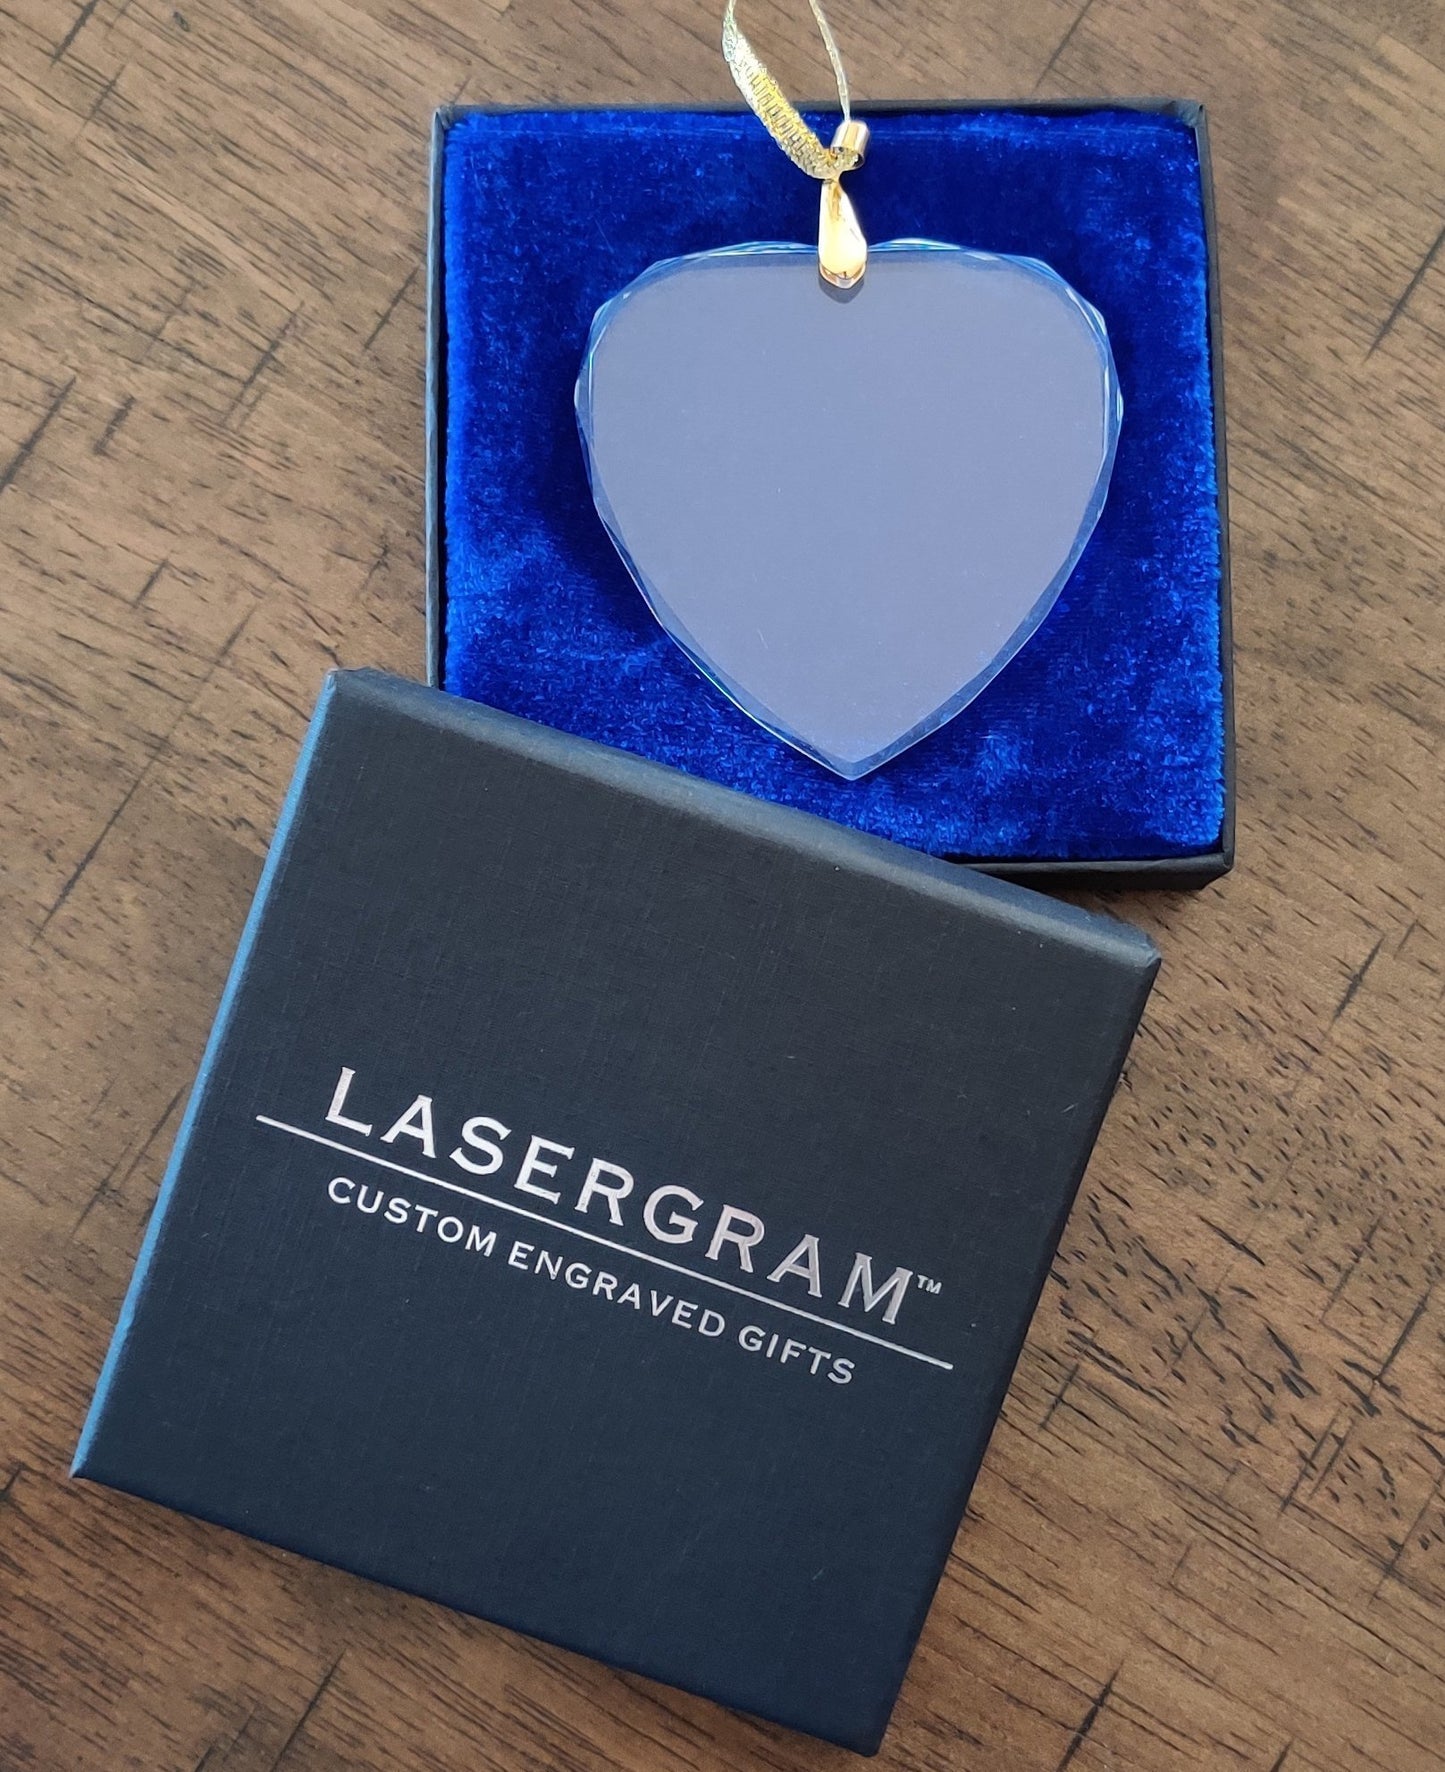 LaserGram Christmas Ornament, Truck Cab, Personalized Engraving Included (Heart Shape)